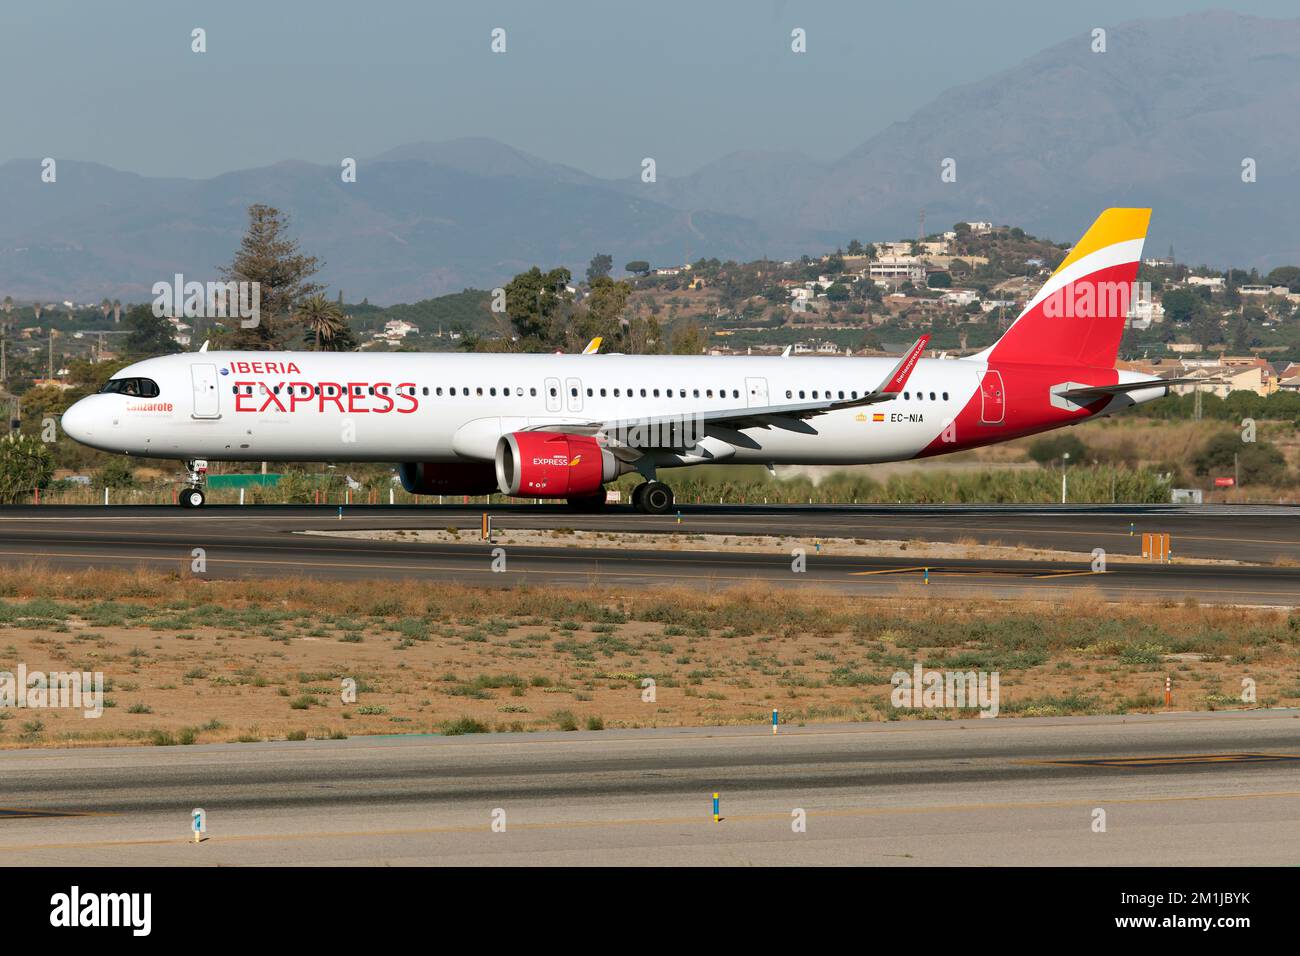 An Iberia Express Airbus 321 NEO ready to take off from Malaga Costa del sol airport.Iberia Express is a Spanish low-cost airline owned by Iberia, which operates short- and medium-haul routes from its parent airline's hub at Adolfo Suárez Madrid–Barajas Airport, providing feeder flights onto Iberia's long-haul network. Stock Photo